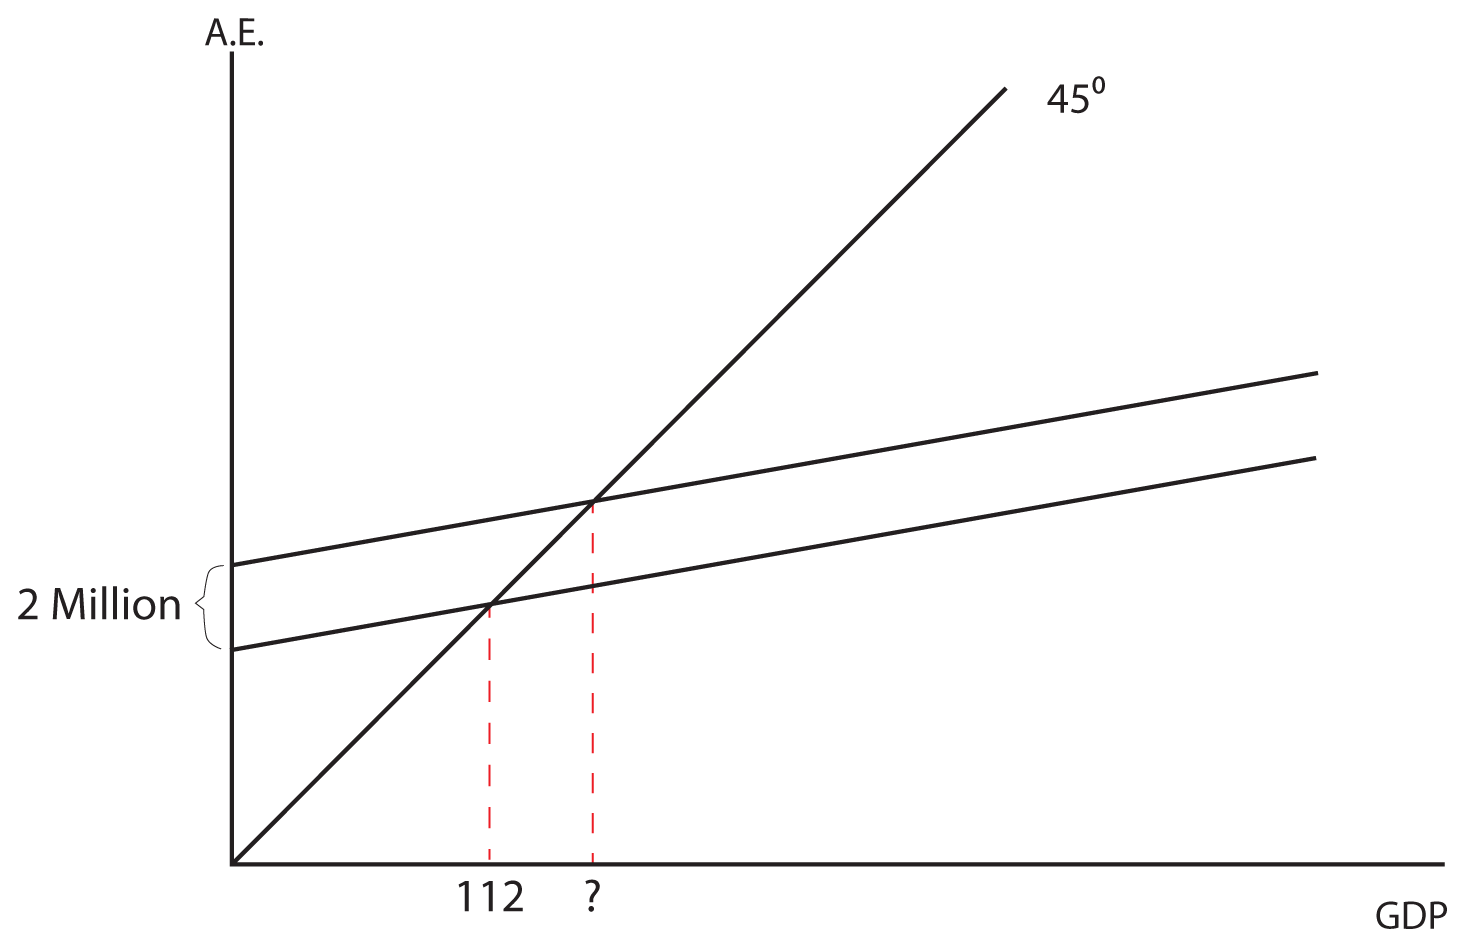 Image 7.05: The image shows a graph. The y axis is labeled A.E. The x axis is labeled GDP. There is a 45 degree line drawn from the origin. There are two lines of equal slope drawn from the y axis, one two million units higher than the other on the x axis. Vertical lines are drawn from the intersection points of the two lines and the 45 degree line. The first intersection point is labeled 112 on the x axis, the second has a question mark.